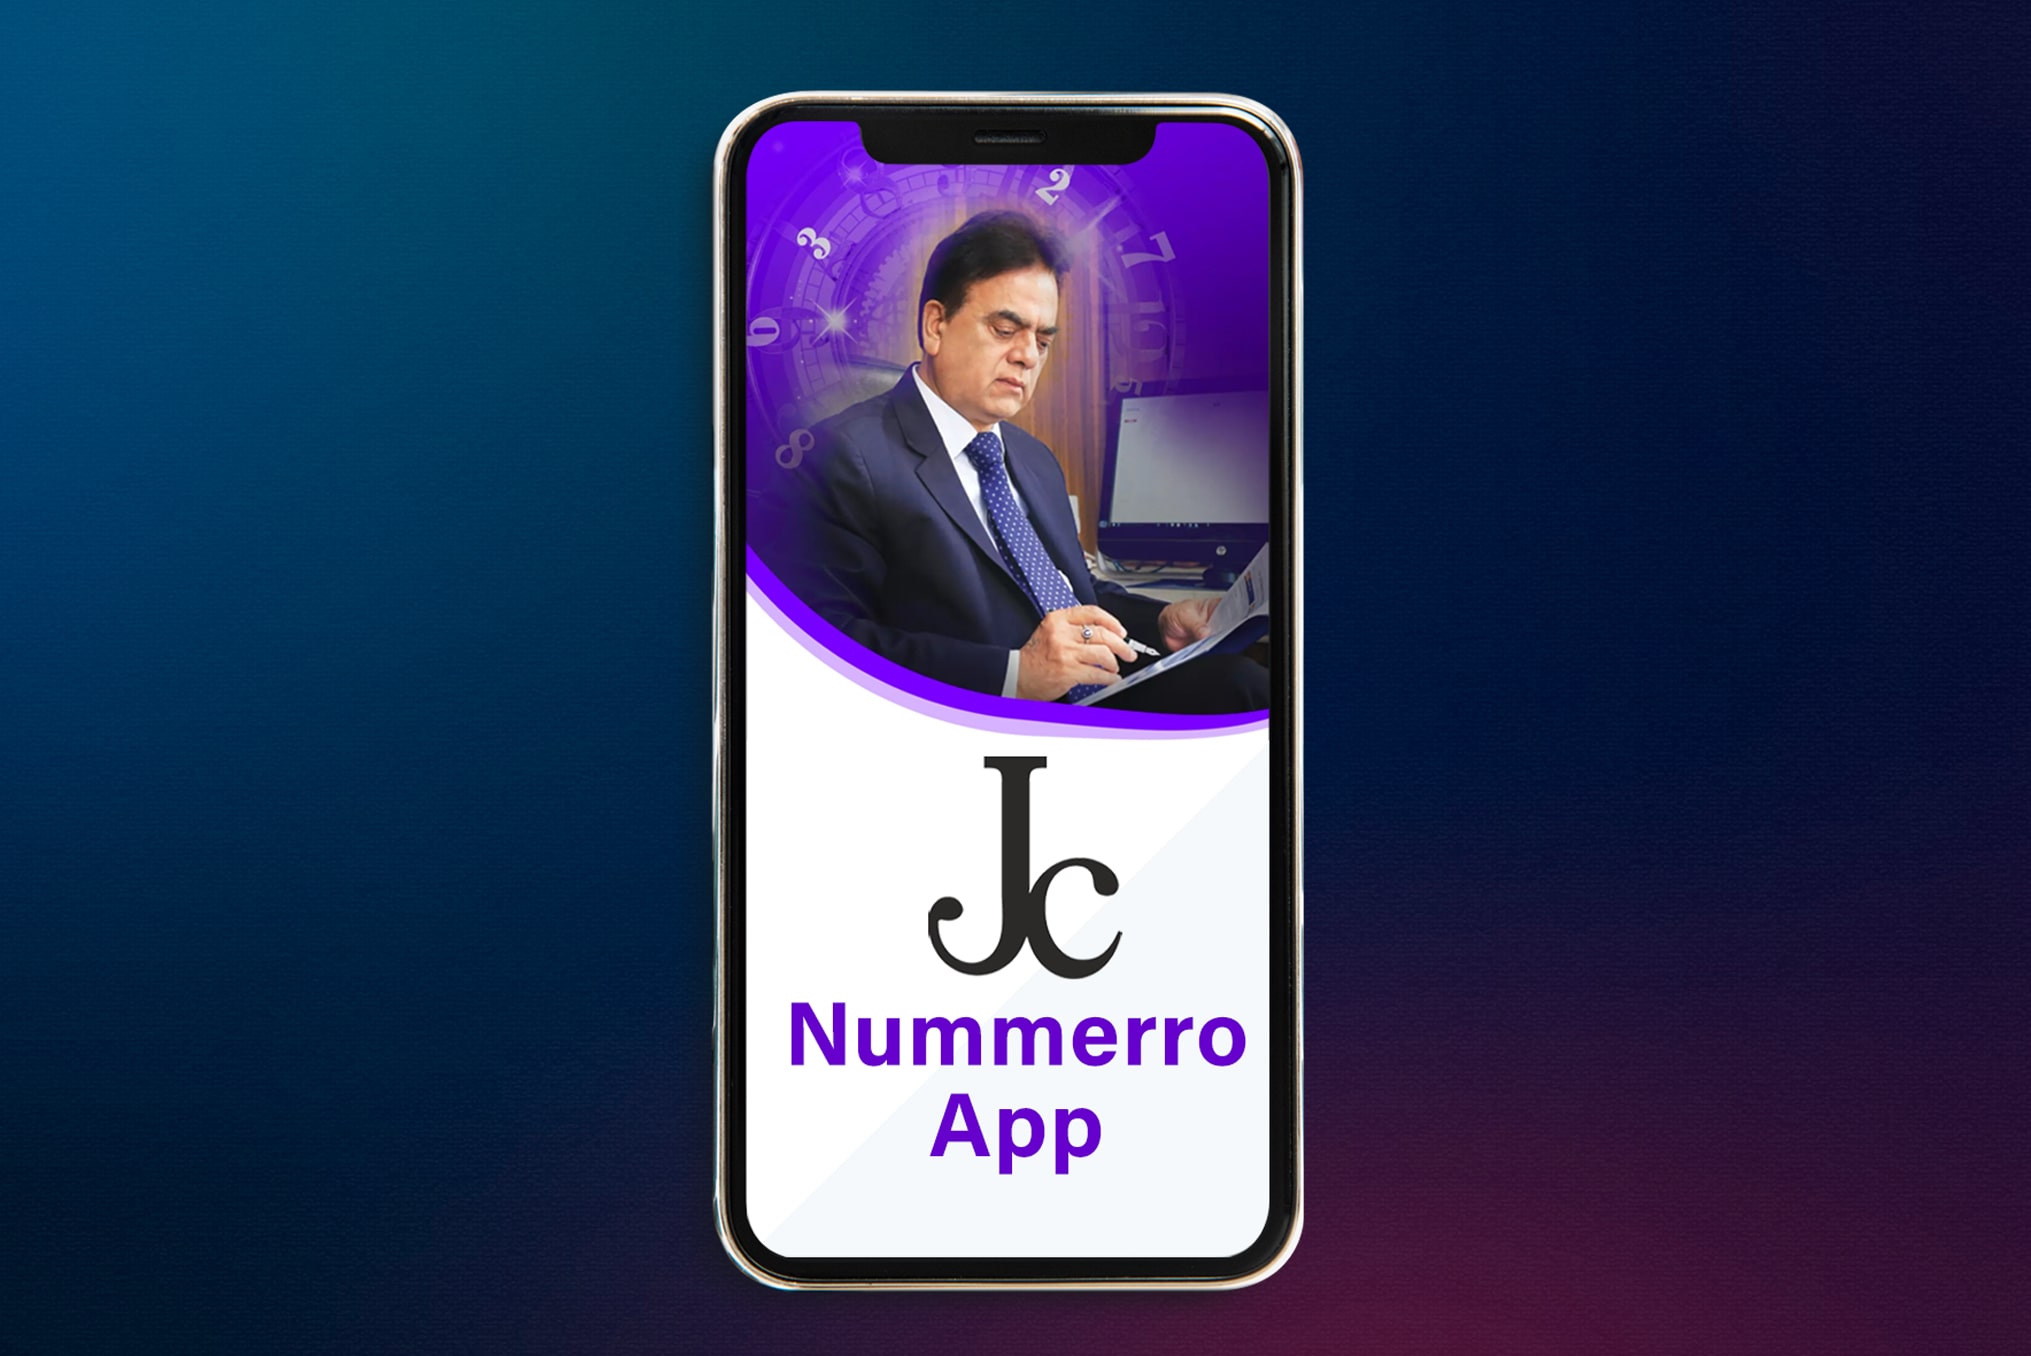 JC Nummerro Numerology App Launched by Chaudhry Nummero Pvt. Ltd.